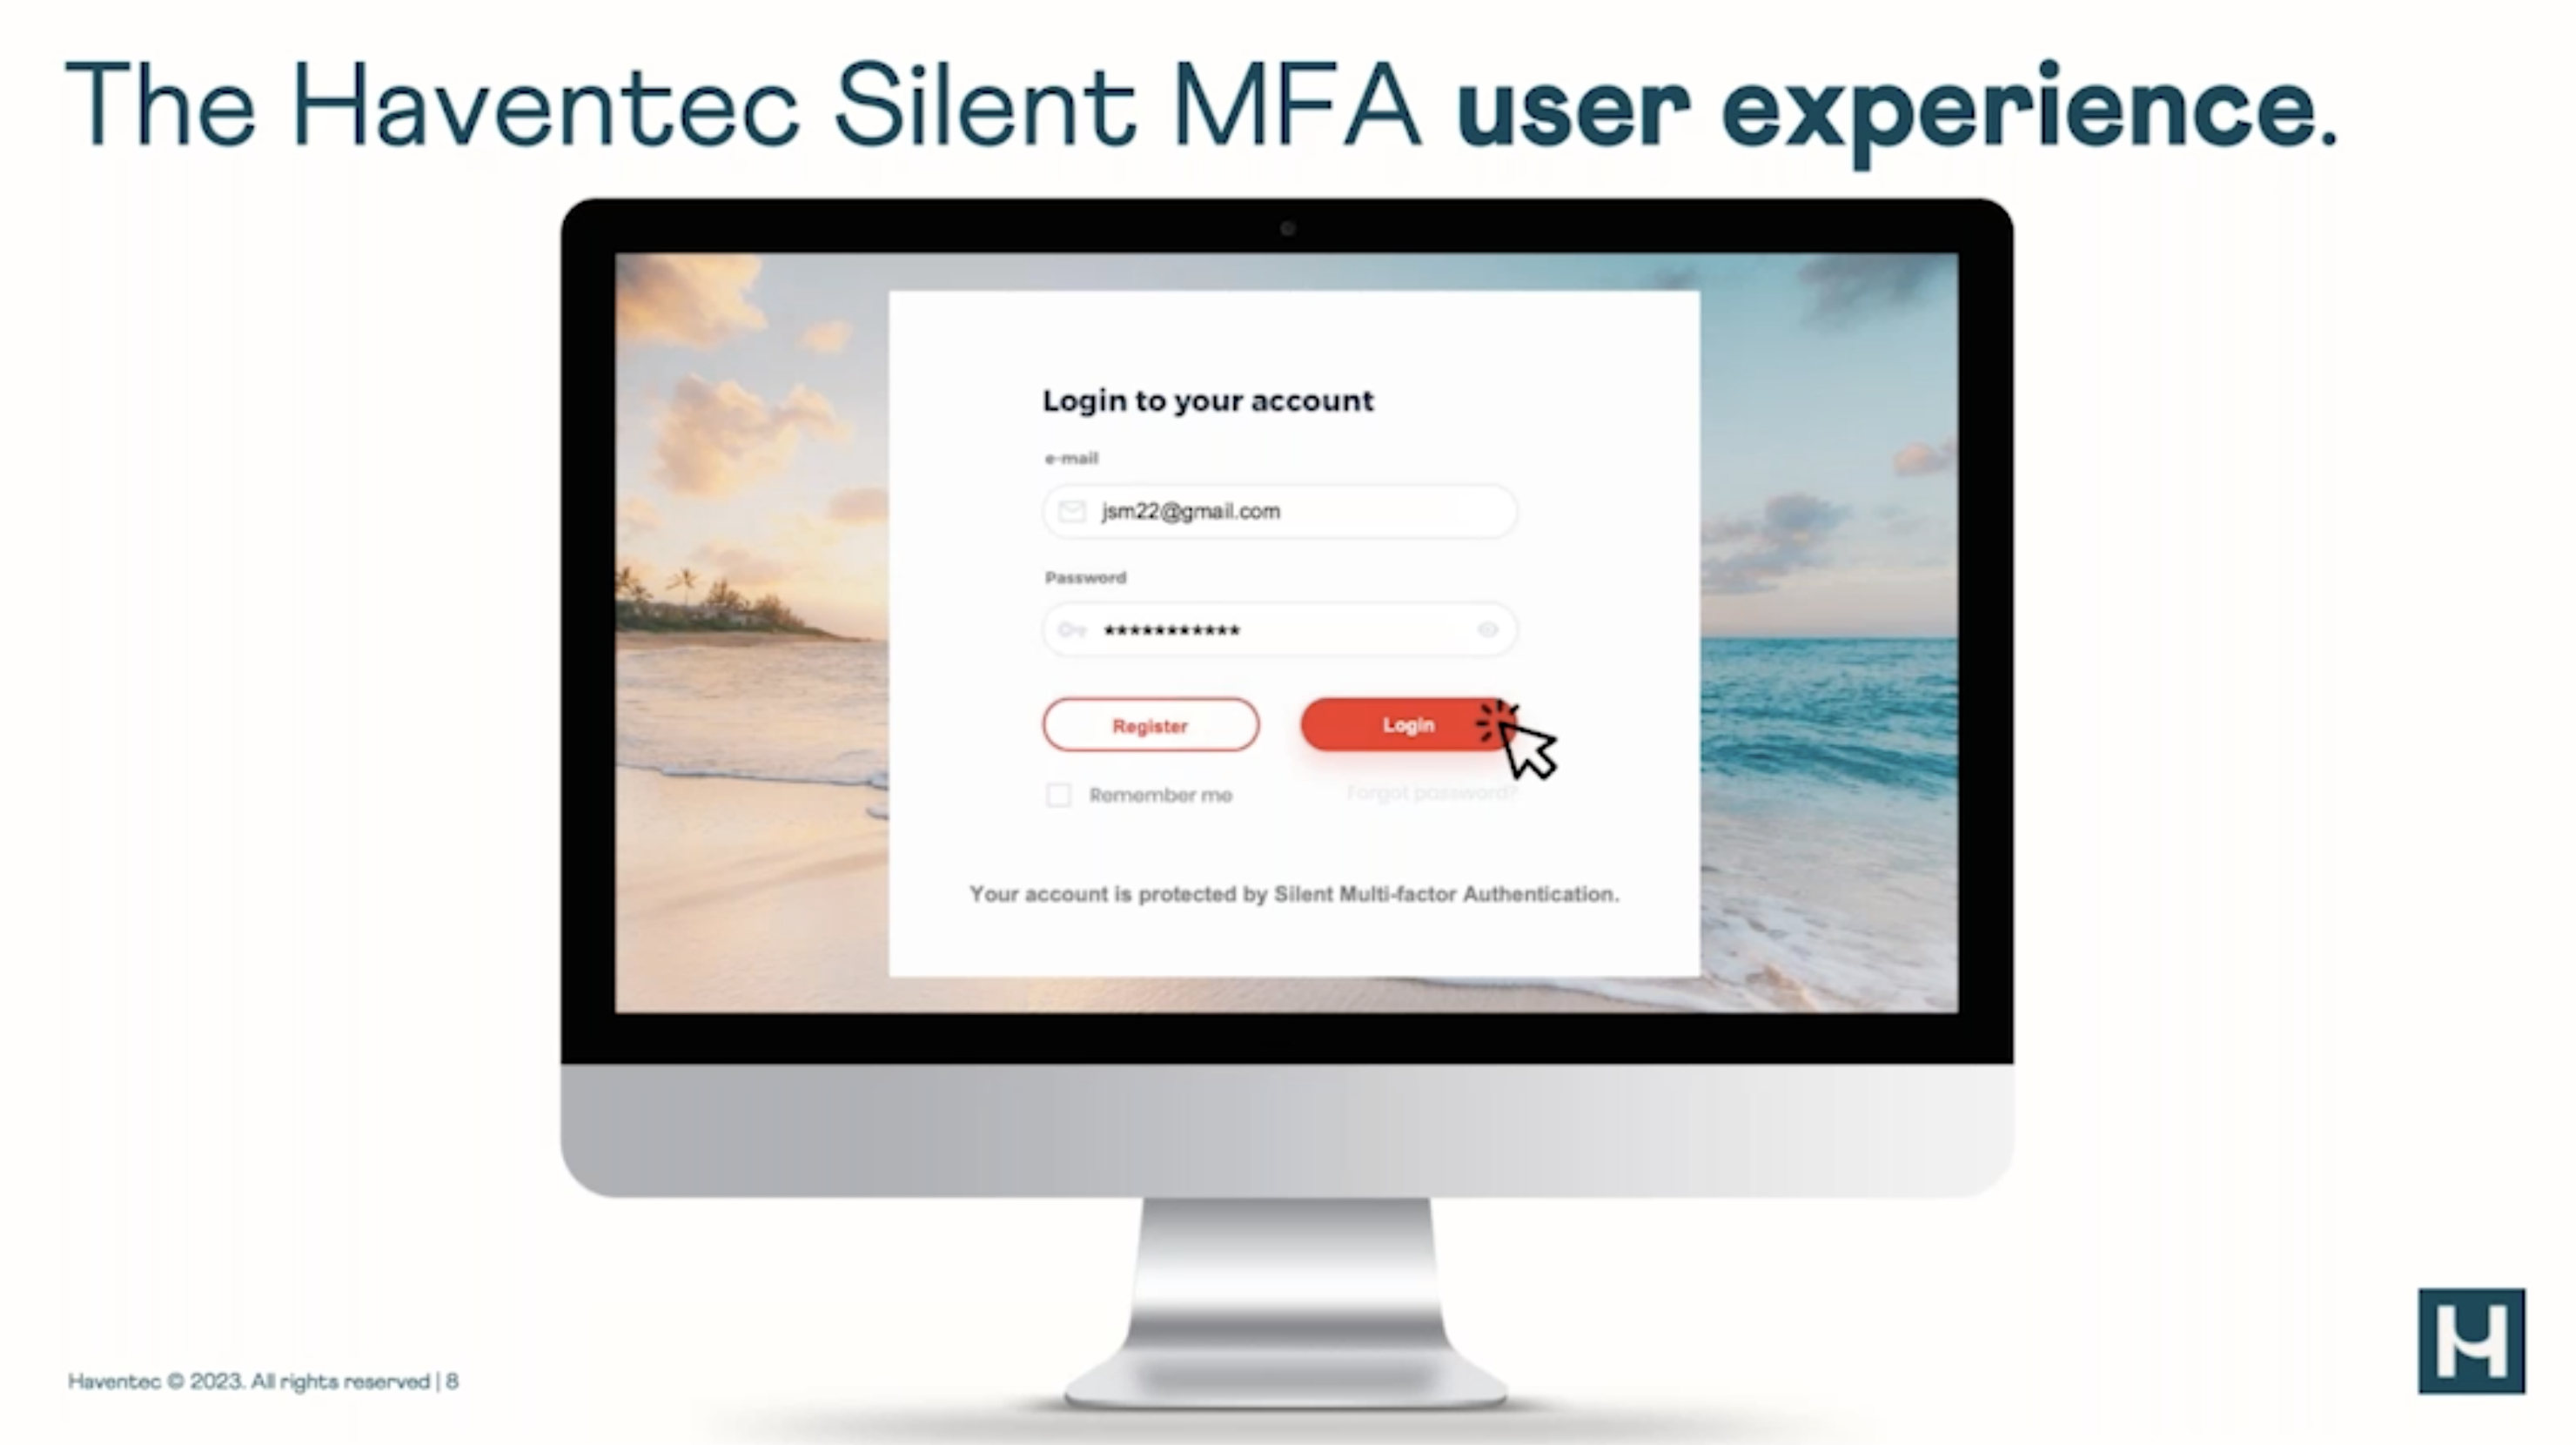 Haventec Silent MFA is invisible and entirely seamless